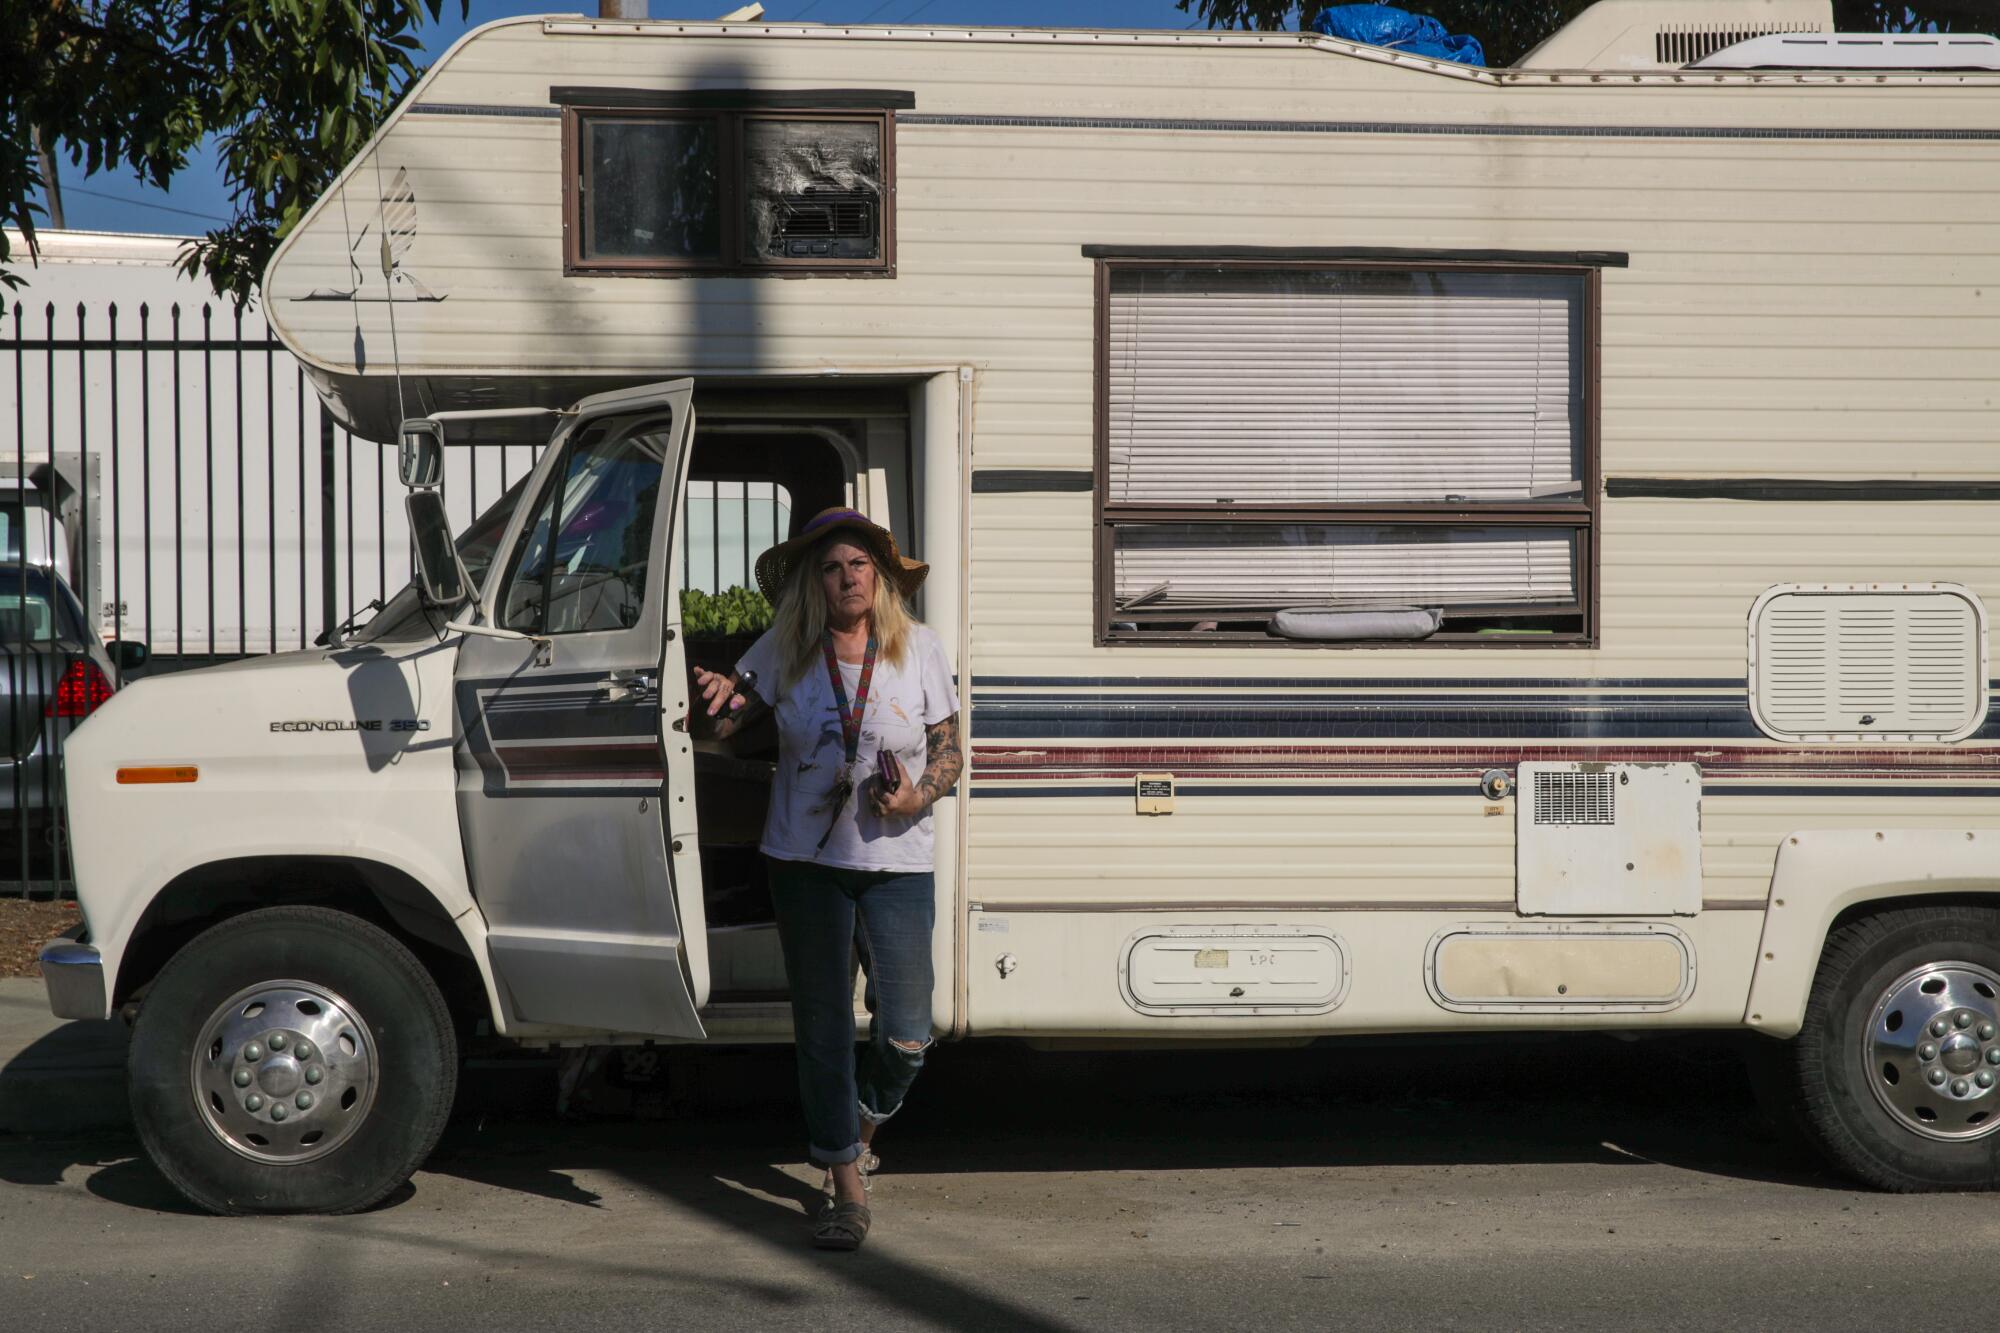 A person exits the driver's door of an RV.